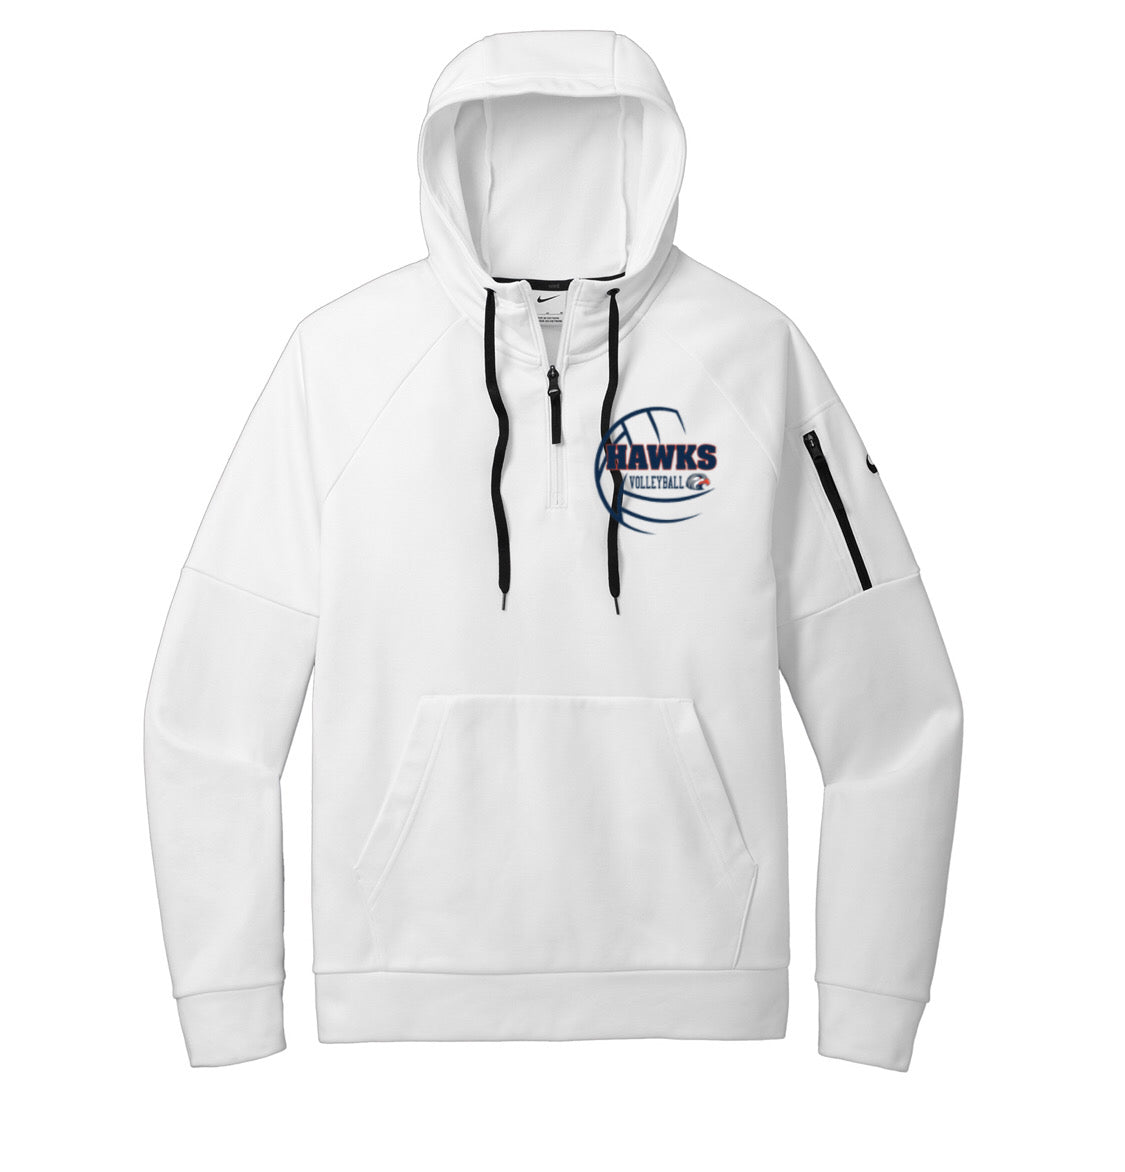 Hawks Volleyball NIKE Therma-FIT Pocket 1/4-Zip Fleece Hoodie - Multiple Color Options - (ALL PRODUCTS WILL BE DELIVERED TO SCHOOL)